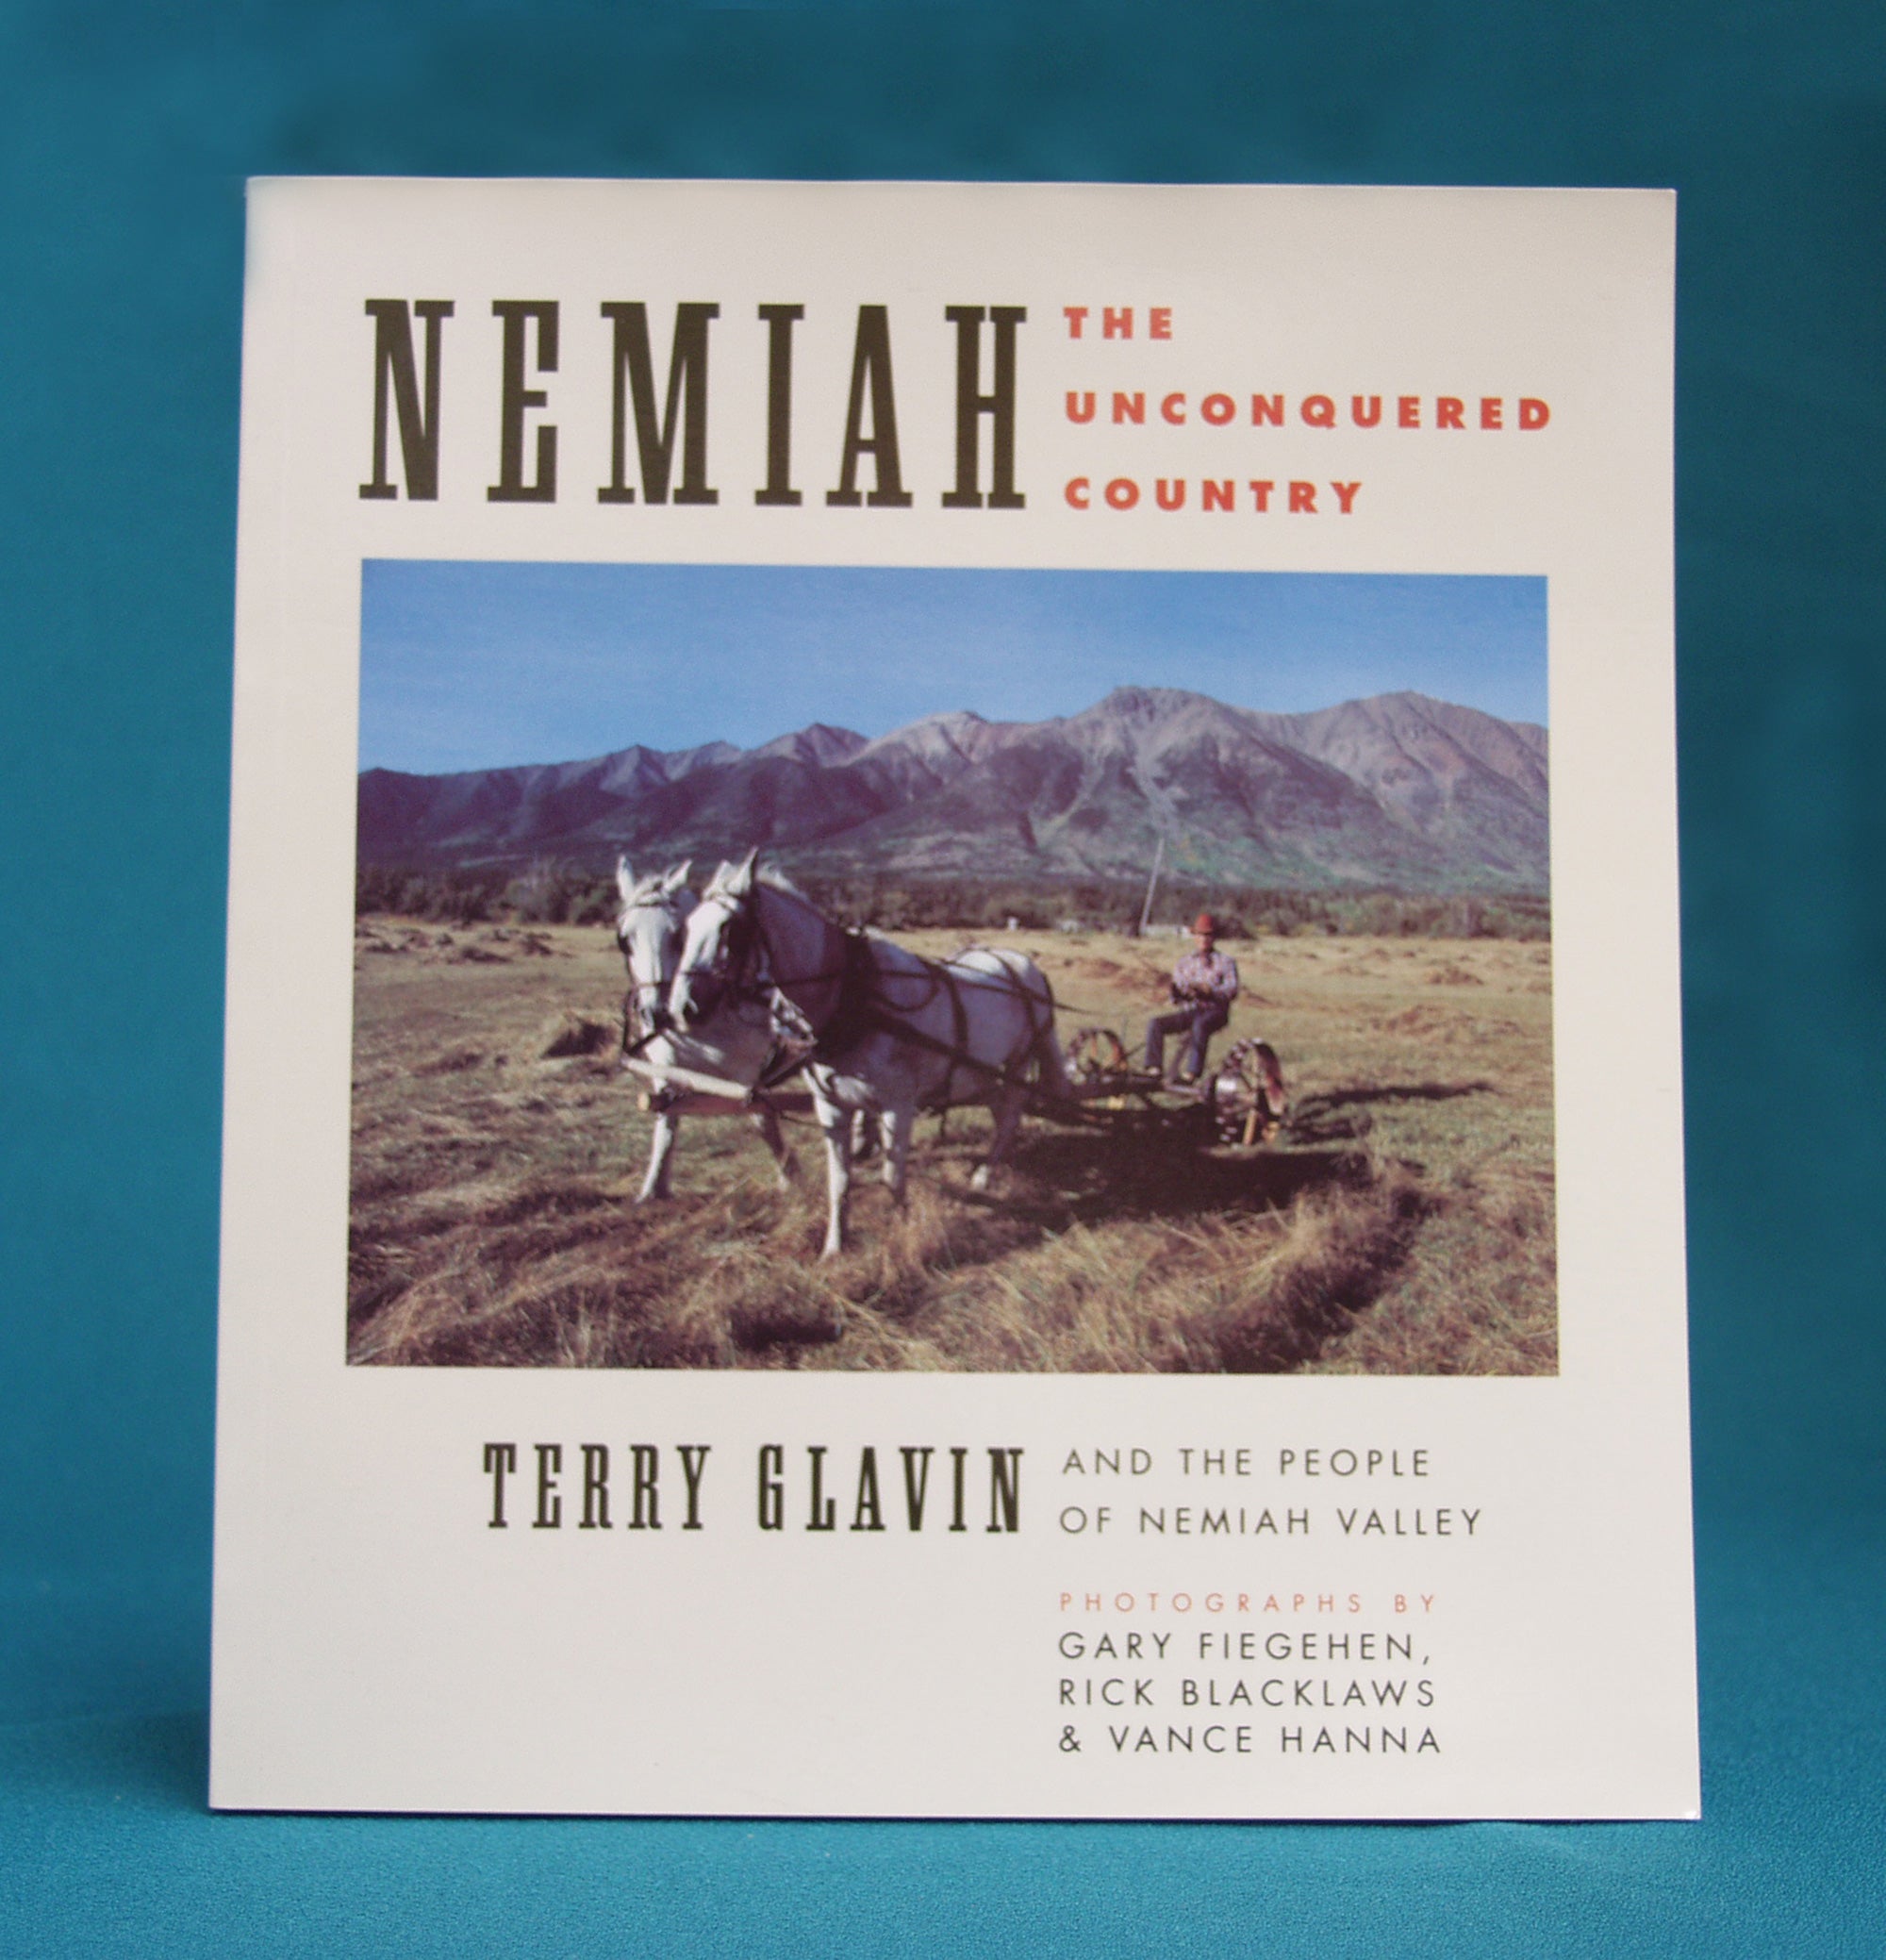 A book cover with a photo of horses pulling farm equipment. Text on the image says "Nemiah - The Unconquered Country. Terry Glavin and the people of the Nemiah Valley. Photographs by Gary Fiegehen, Rick Blacklaws, and Vance Hanna." End of image description.